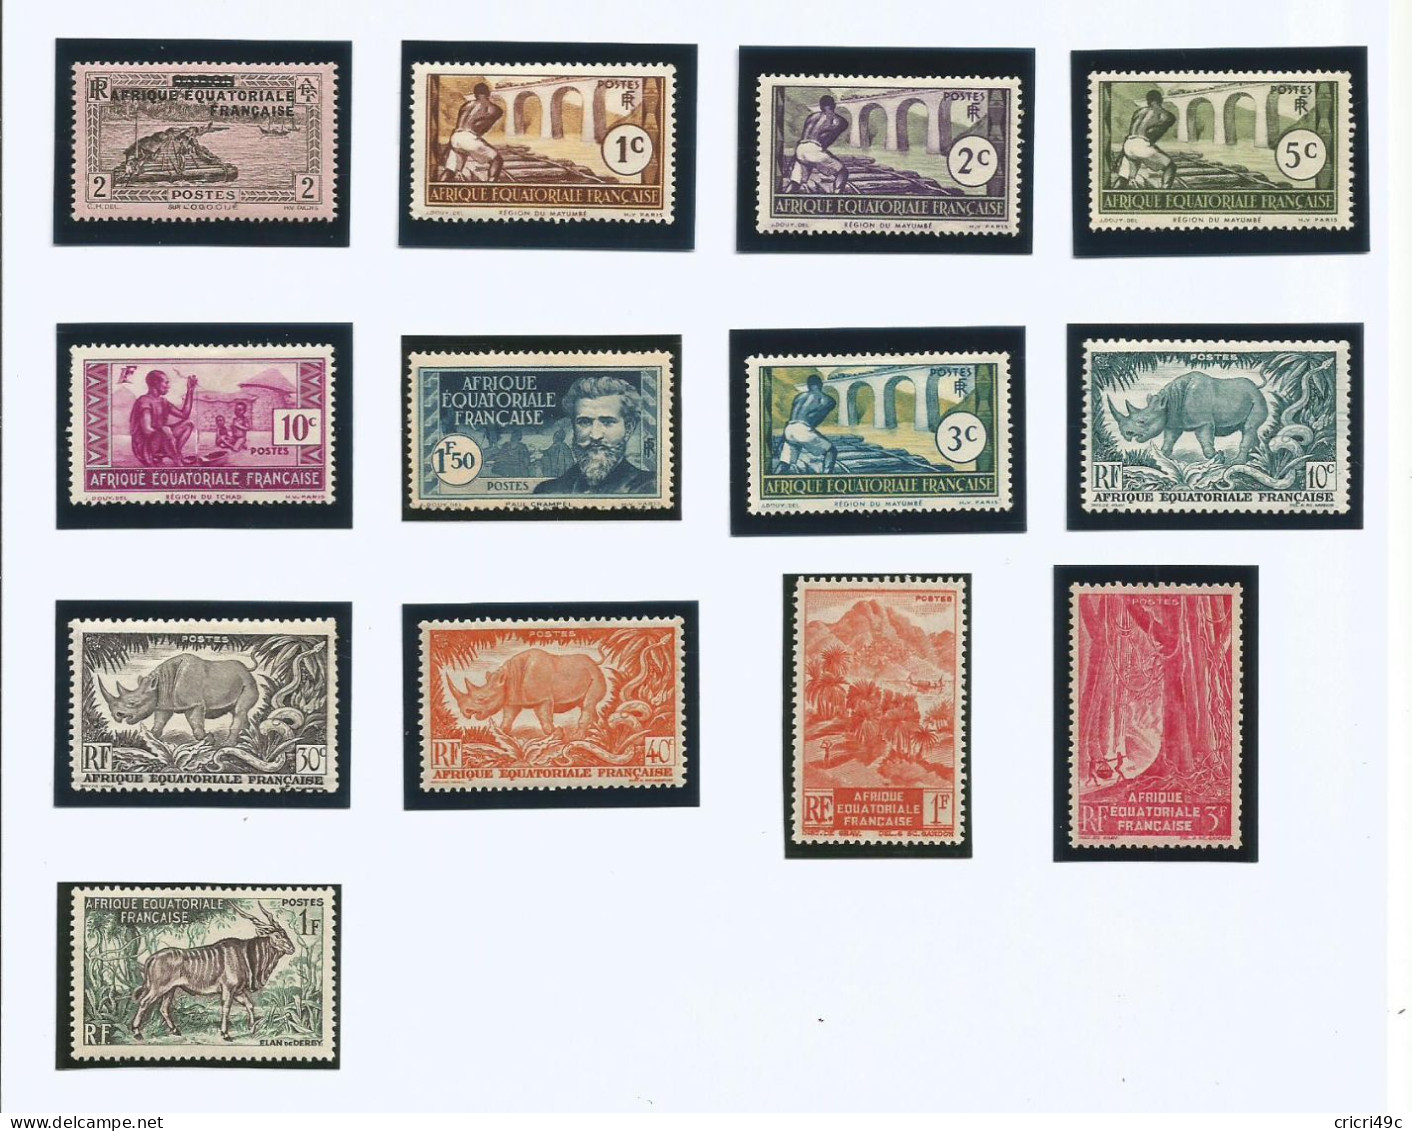 A.E.F 13 Timbres Neufs Avec Charniére. N° Y&T 18.33.34.36.37.54.77.208.209.210.214.218.238 - Neufs